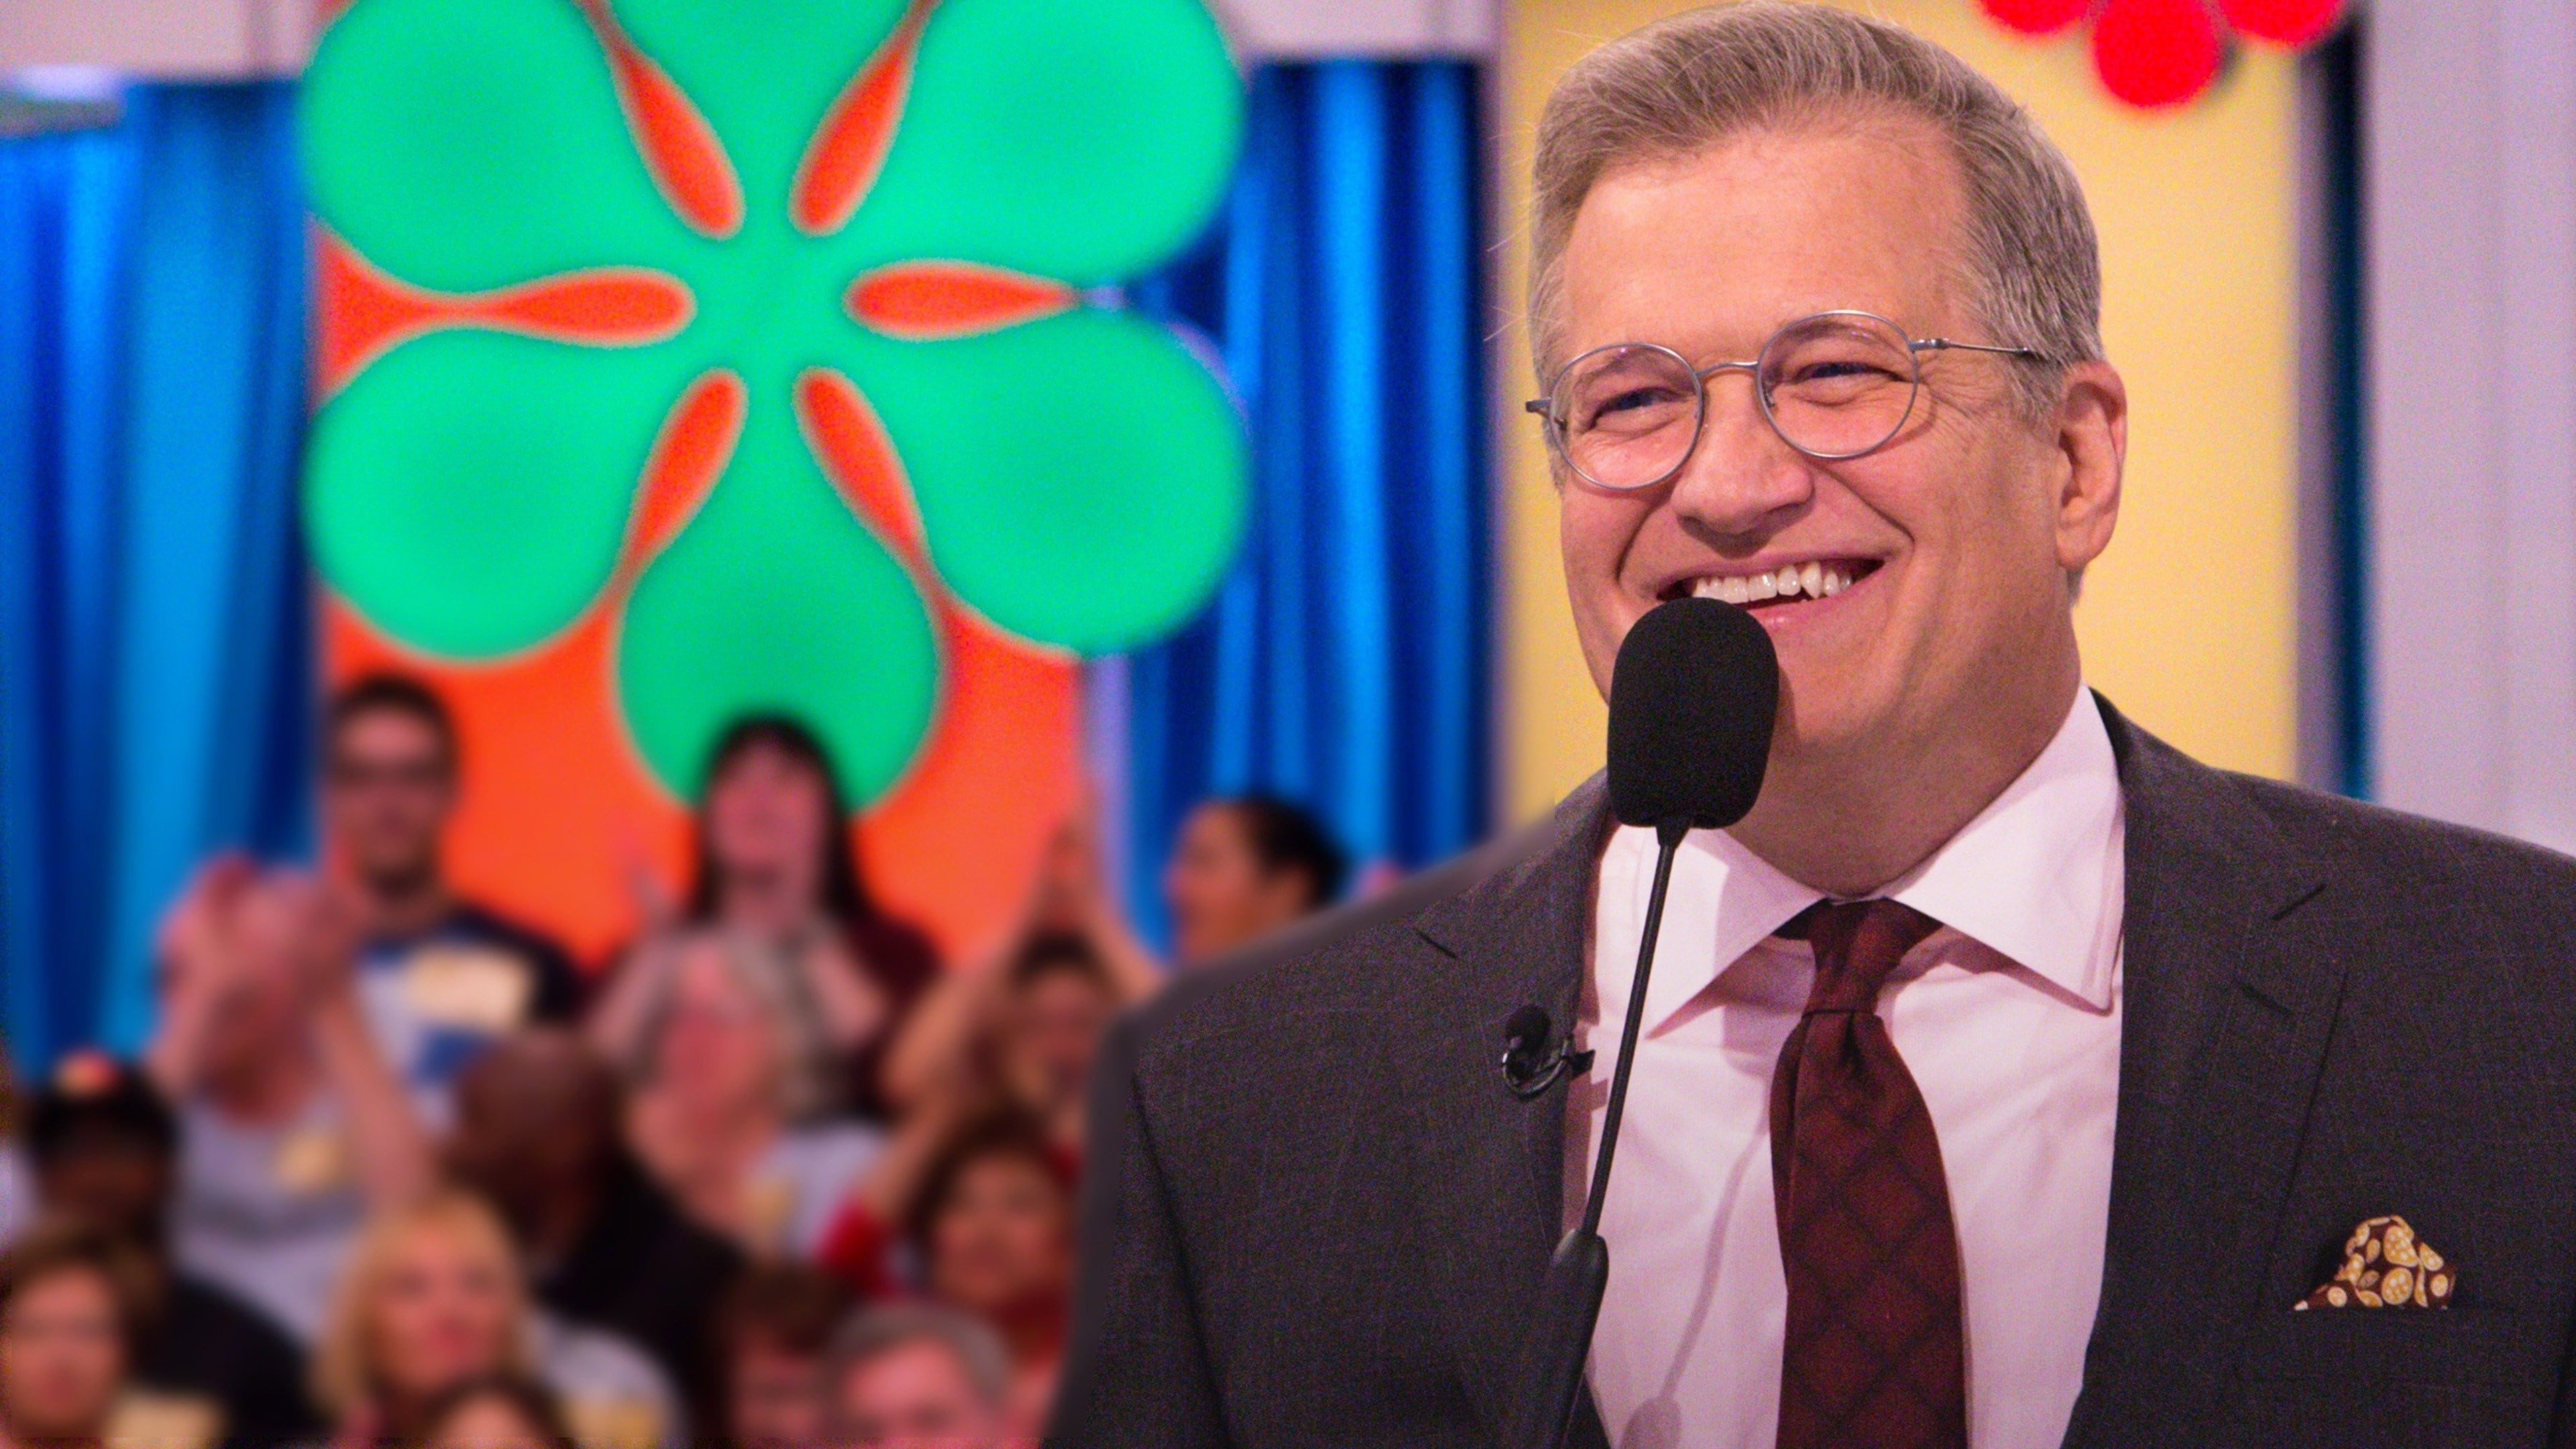 The Price Is Right - Season 1 Episode 29 : The Price Is Right Season 1 Episode 29